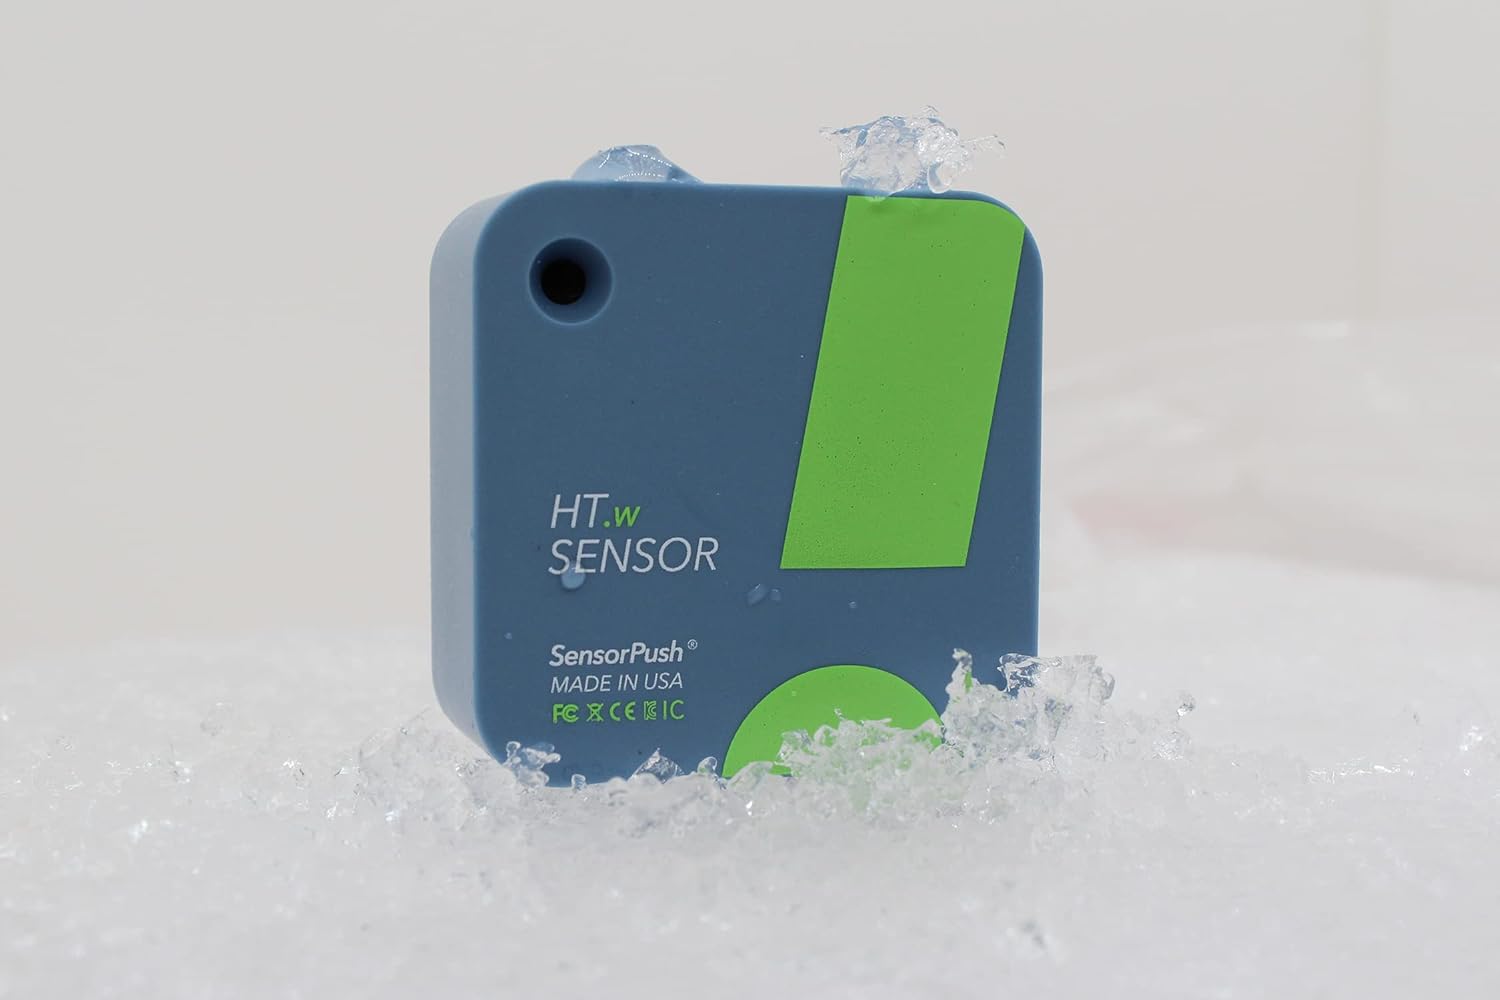 A hygrometer for measuring pool temperature is sitting in snow.